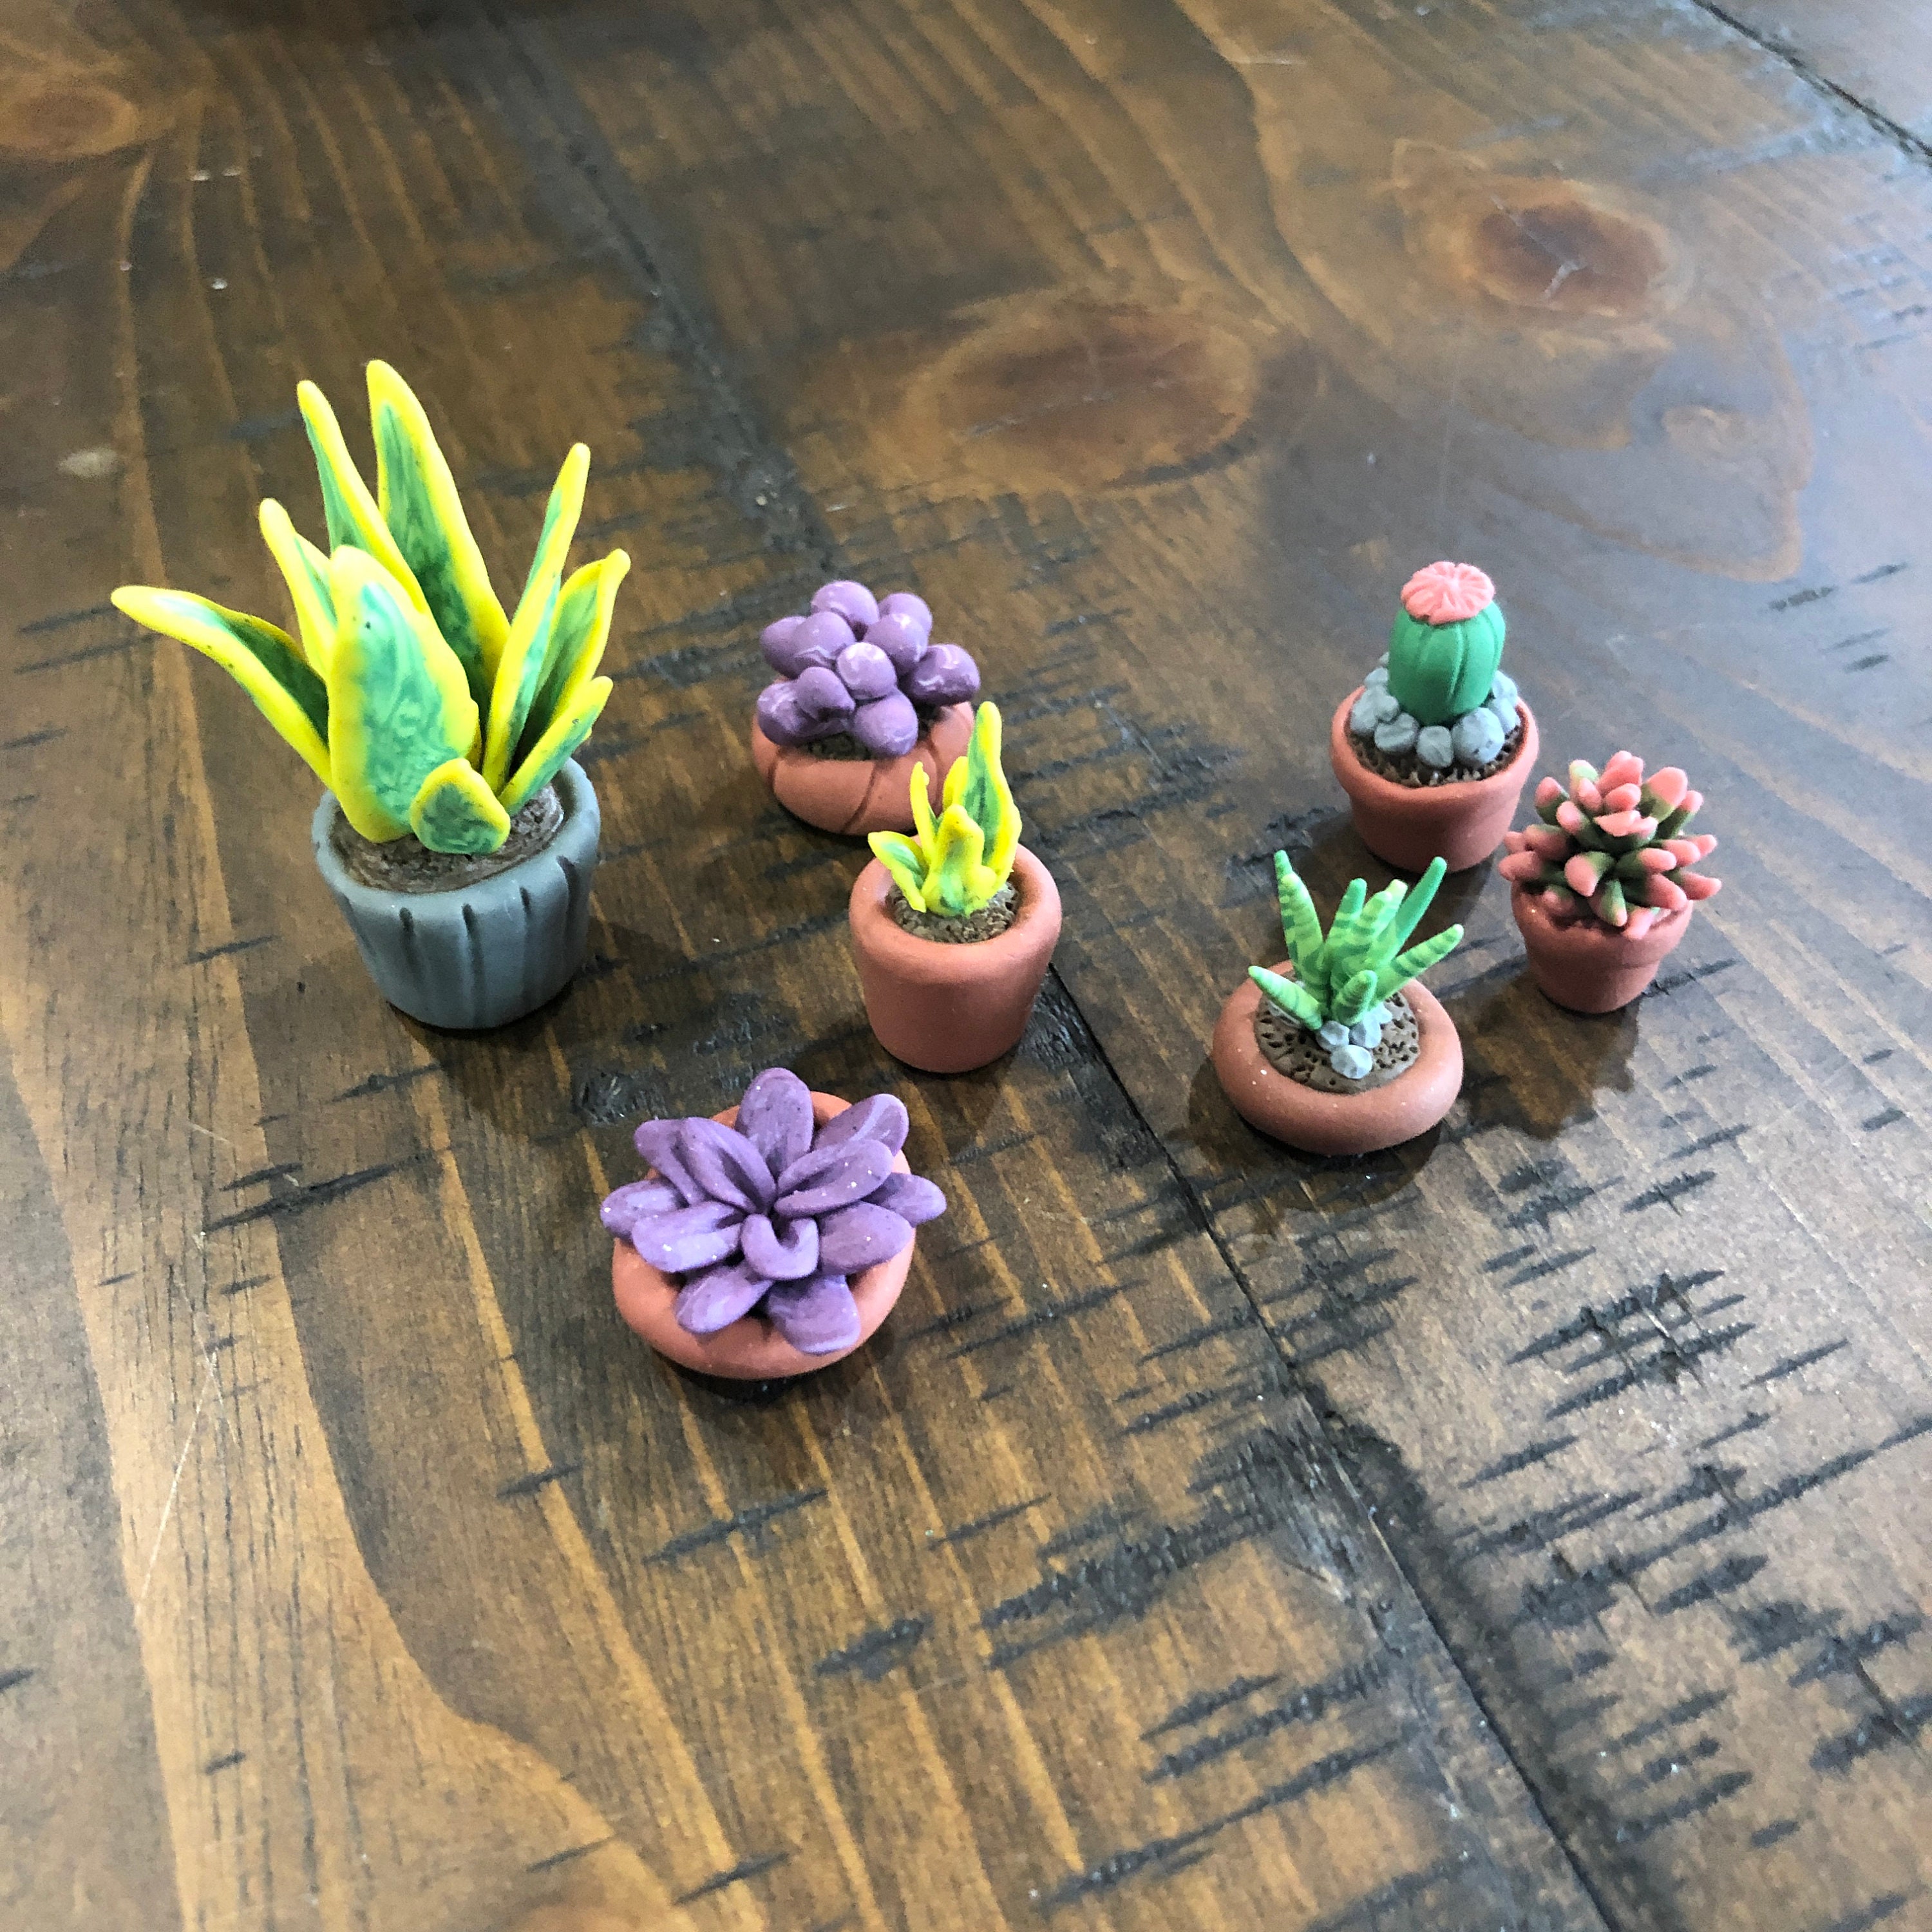 How To Make Mini Clay Succulents Craft - Home Crafts and More